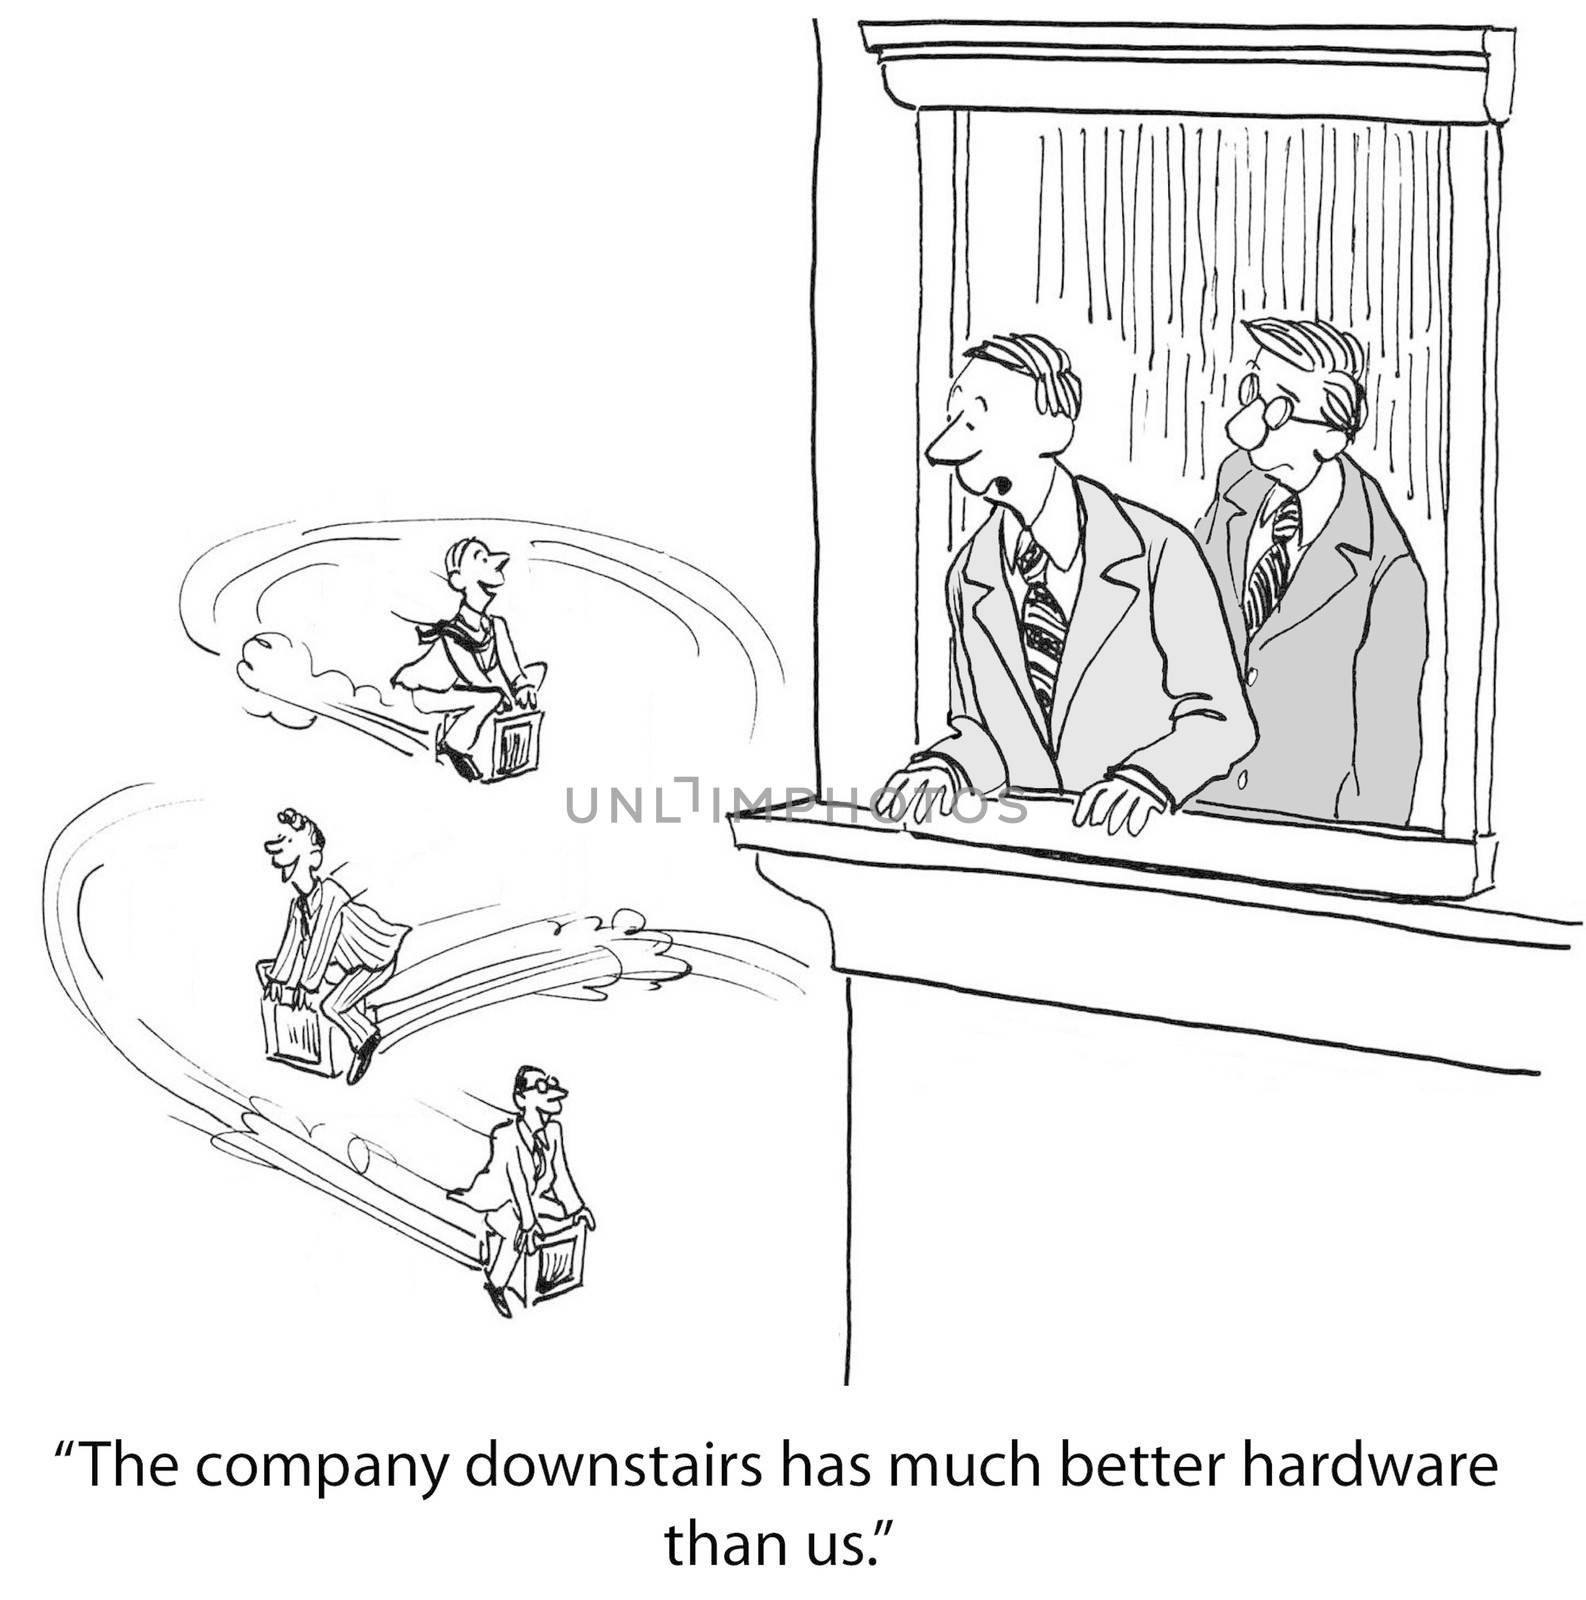 "The company downstairs has much better hardware than us."